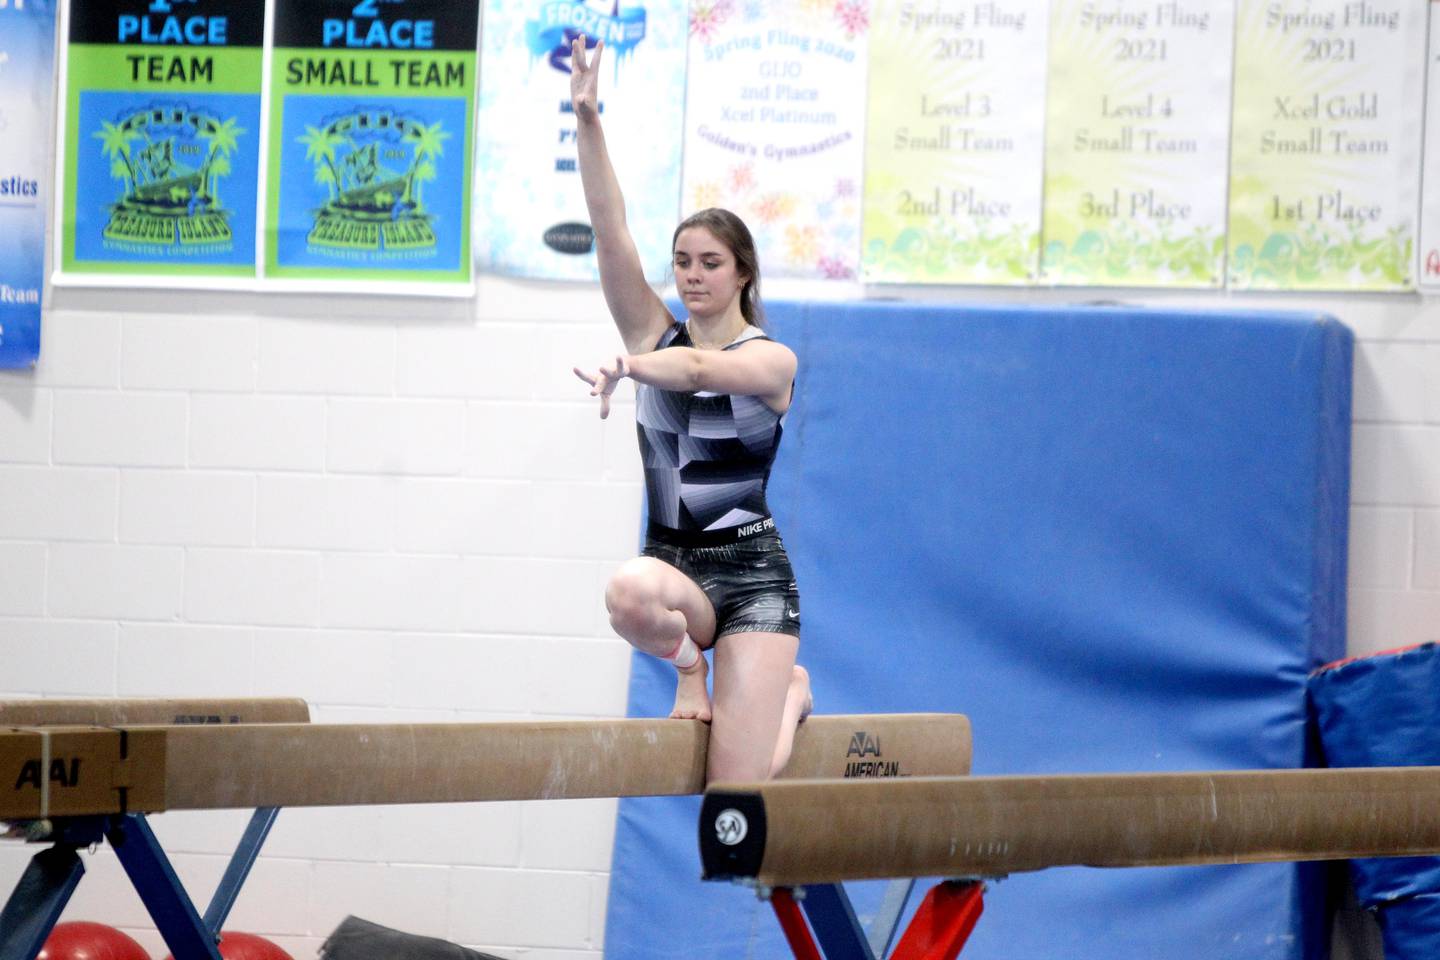 Kaneland senior gymnast Olivia Kerrins works out at the Aurora Turners gym in Aurora on Monday, Jan. 16, 2023. Kerrins has overcome multiple concussions, a severe knee injury and the onset of postural orthostatic tachycardia syndrome (POTS) during her athletic career.